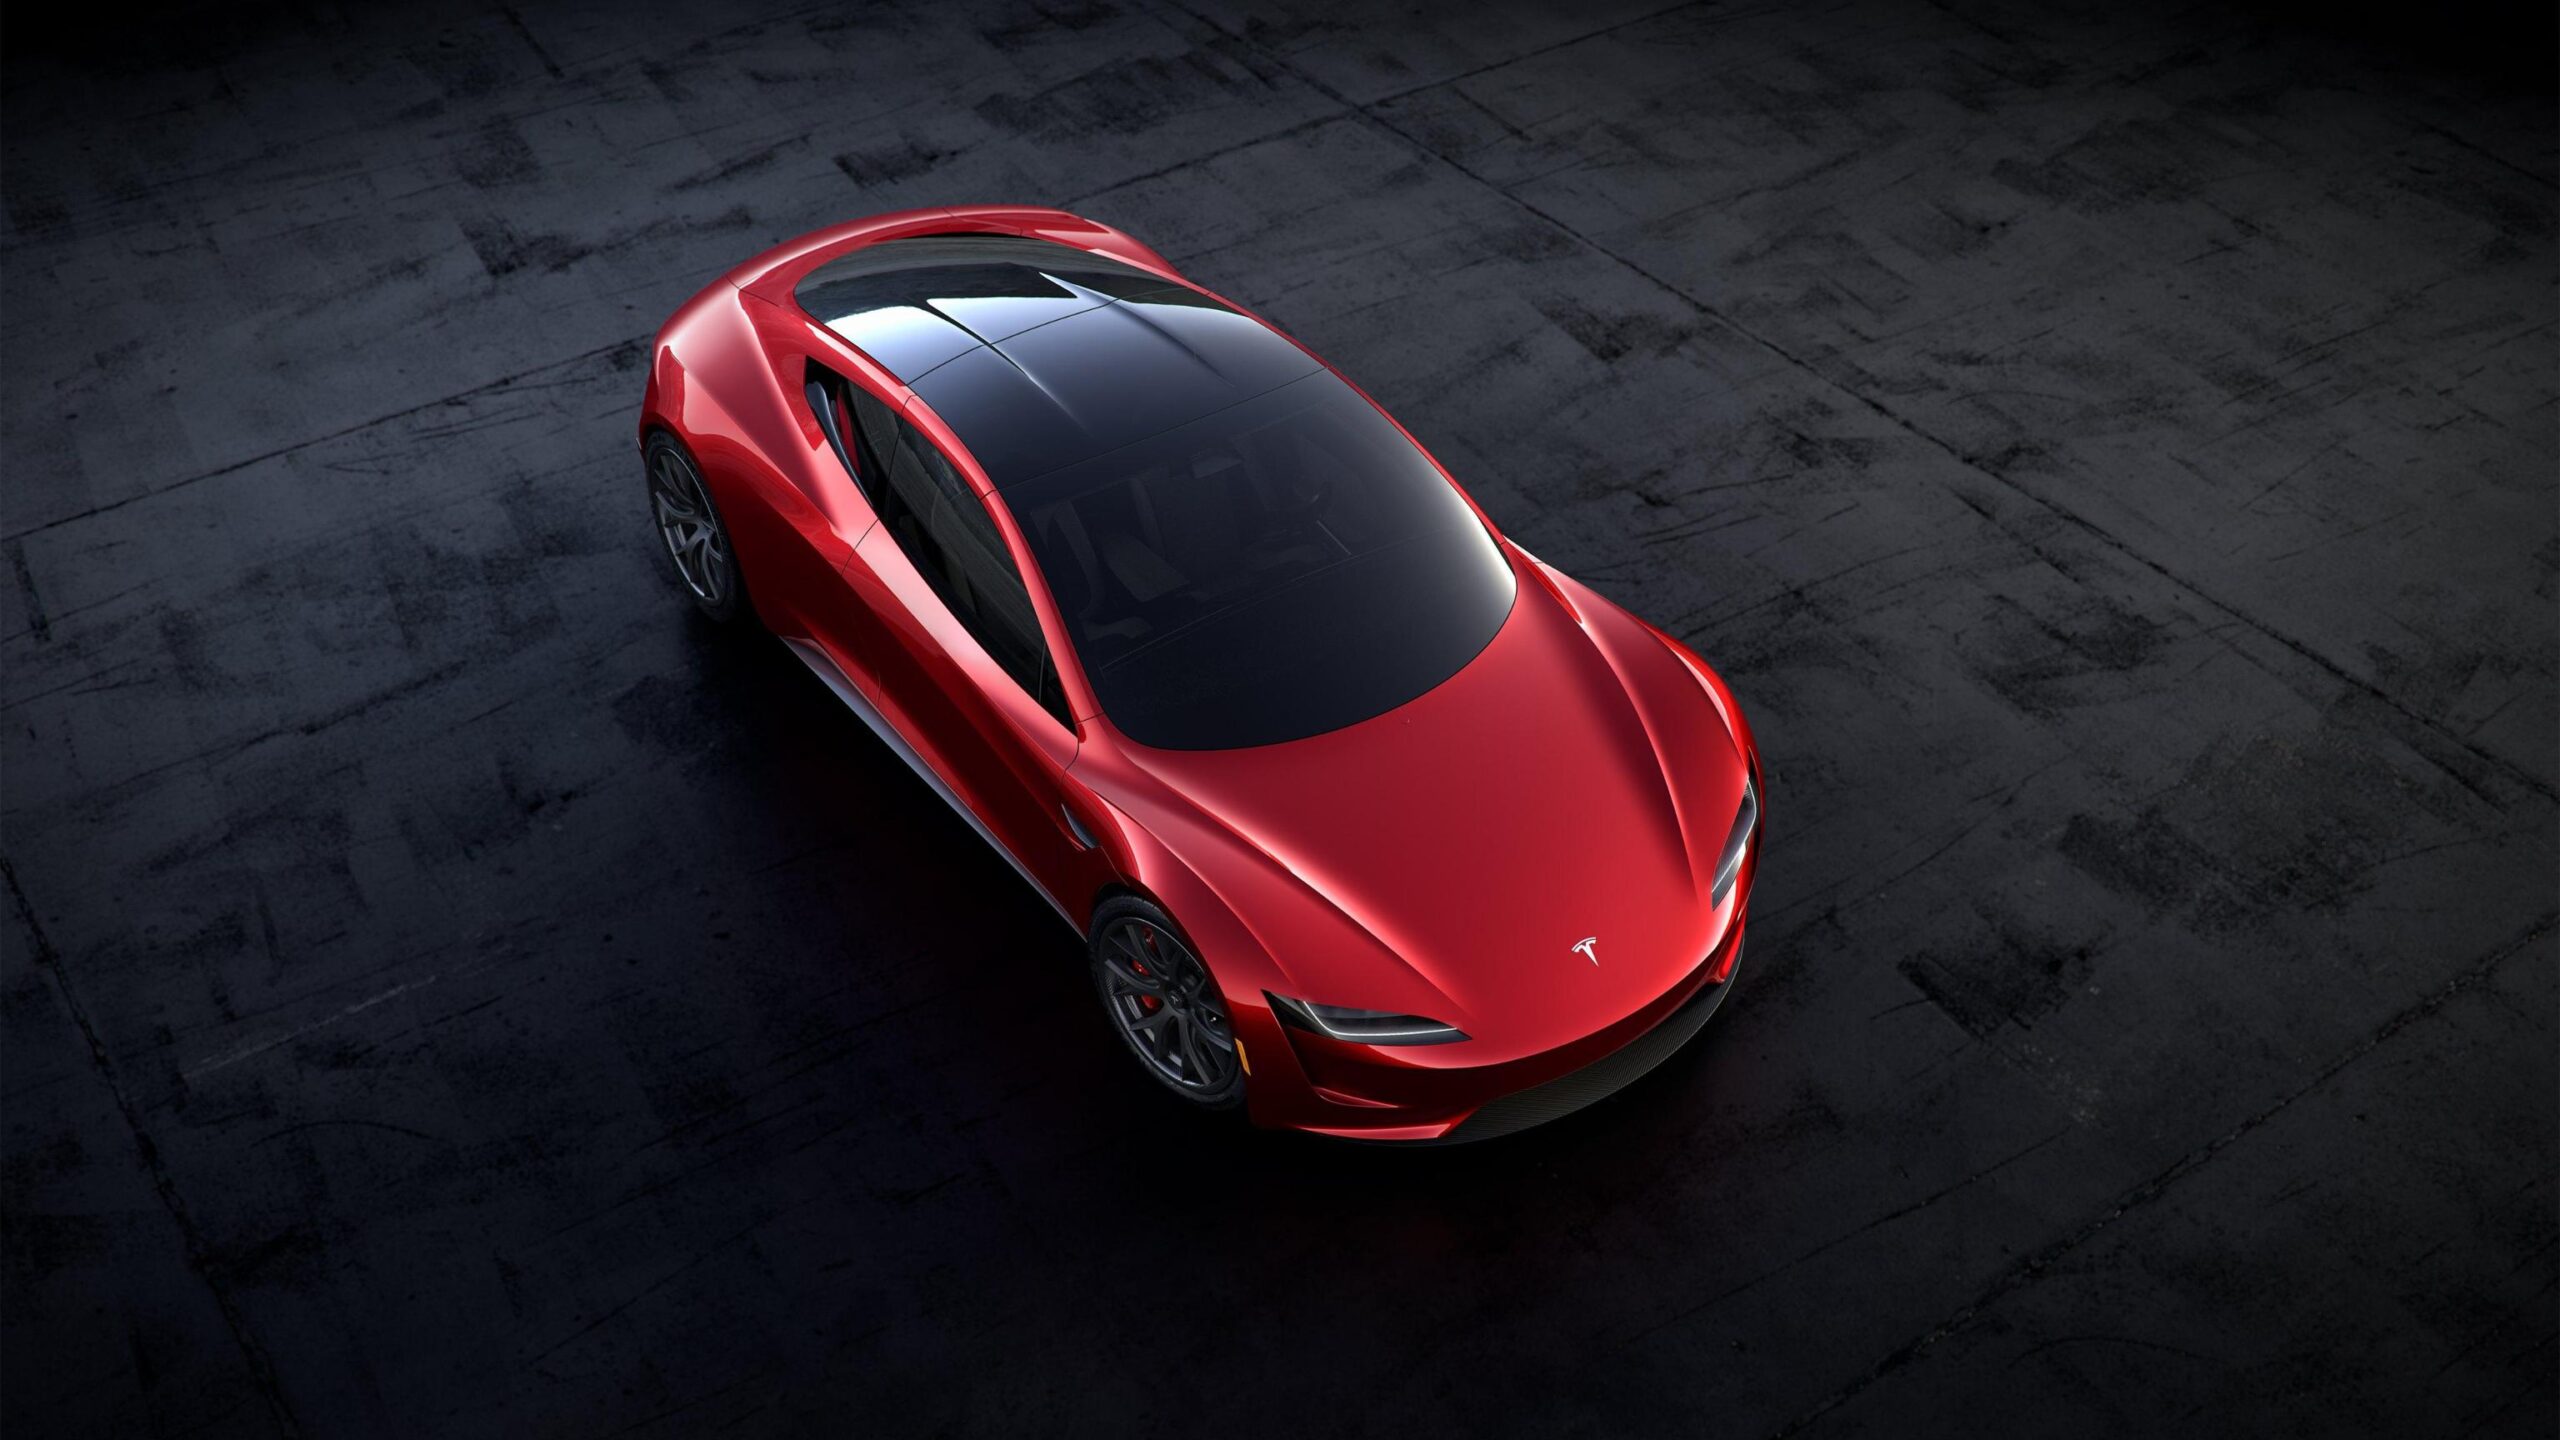 epa06335612 A handout photo made available by Tesla 16 November 2017, showing an artists' view of the new Tesla Roadster electric sports vehicle. The car was presented to media 16 November 2017 at Tesla's Los Angeles design centre, Los Angeles, USA. Tesla says the Roadster will accelerate from 0-60 mph (or 0-96 km/h) in less than two seconds. Tesla says the new Roadster will cost 200,000 USD and will be released in some three years time. Tesla has began to take in orders for the new Roadster, and says new buyers will have to pay a 45,000 USD deposit. However, clients interested in buying one of the first 1,000 vehicles of the limited edition 'Founders Series' will have to pay 250,000 USD for the car.  EPA/TESLA HANDOUT  HANDOUT EDITORIAL USE ONLY/NO SALES